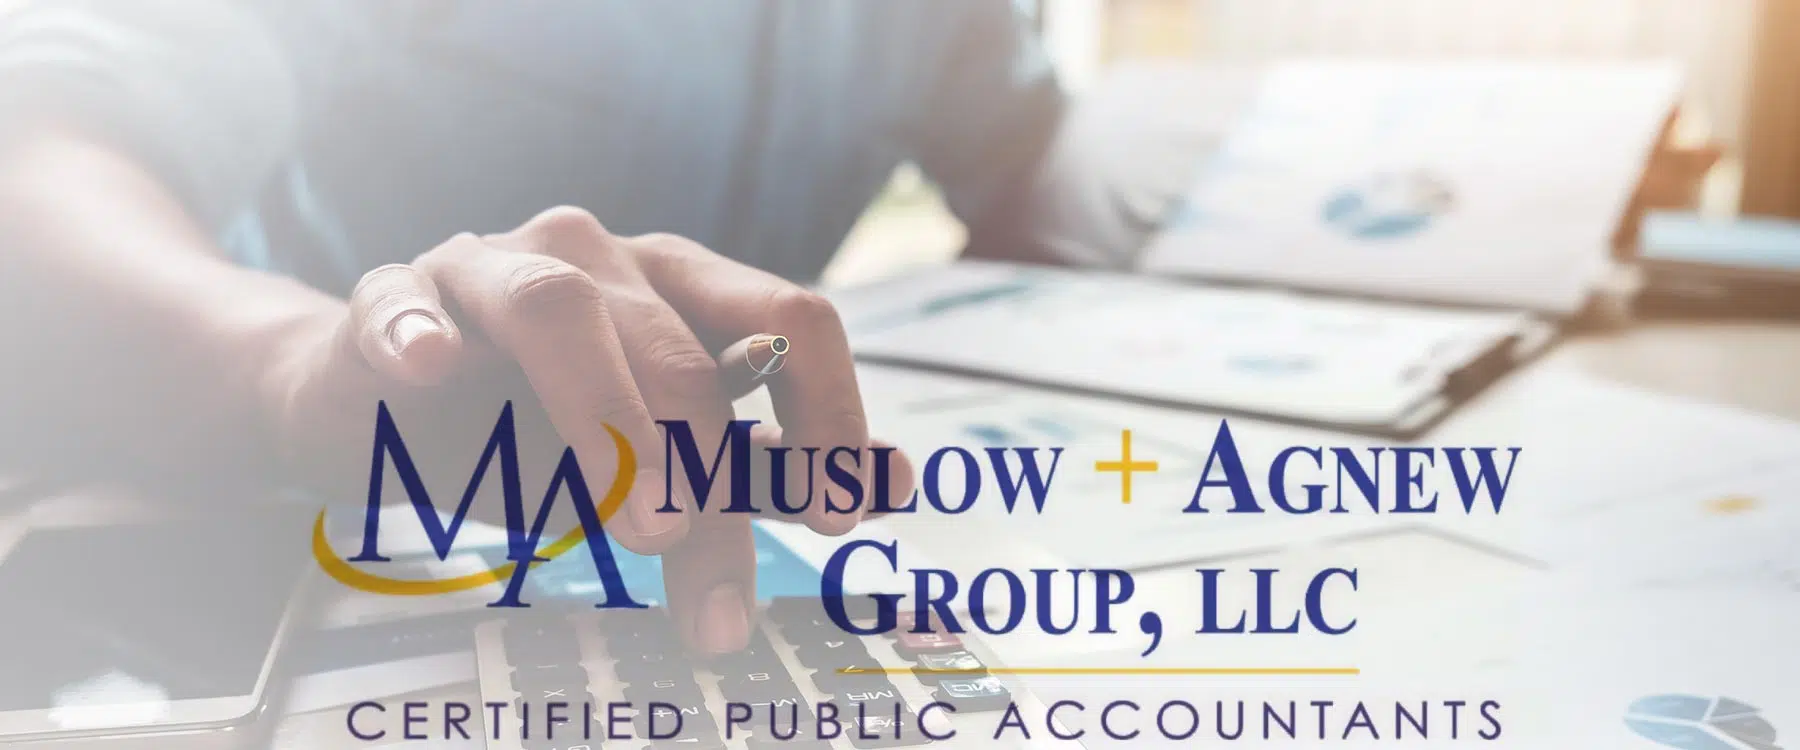 Muslow + Agnew Group